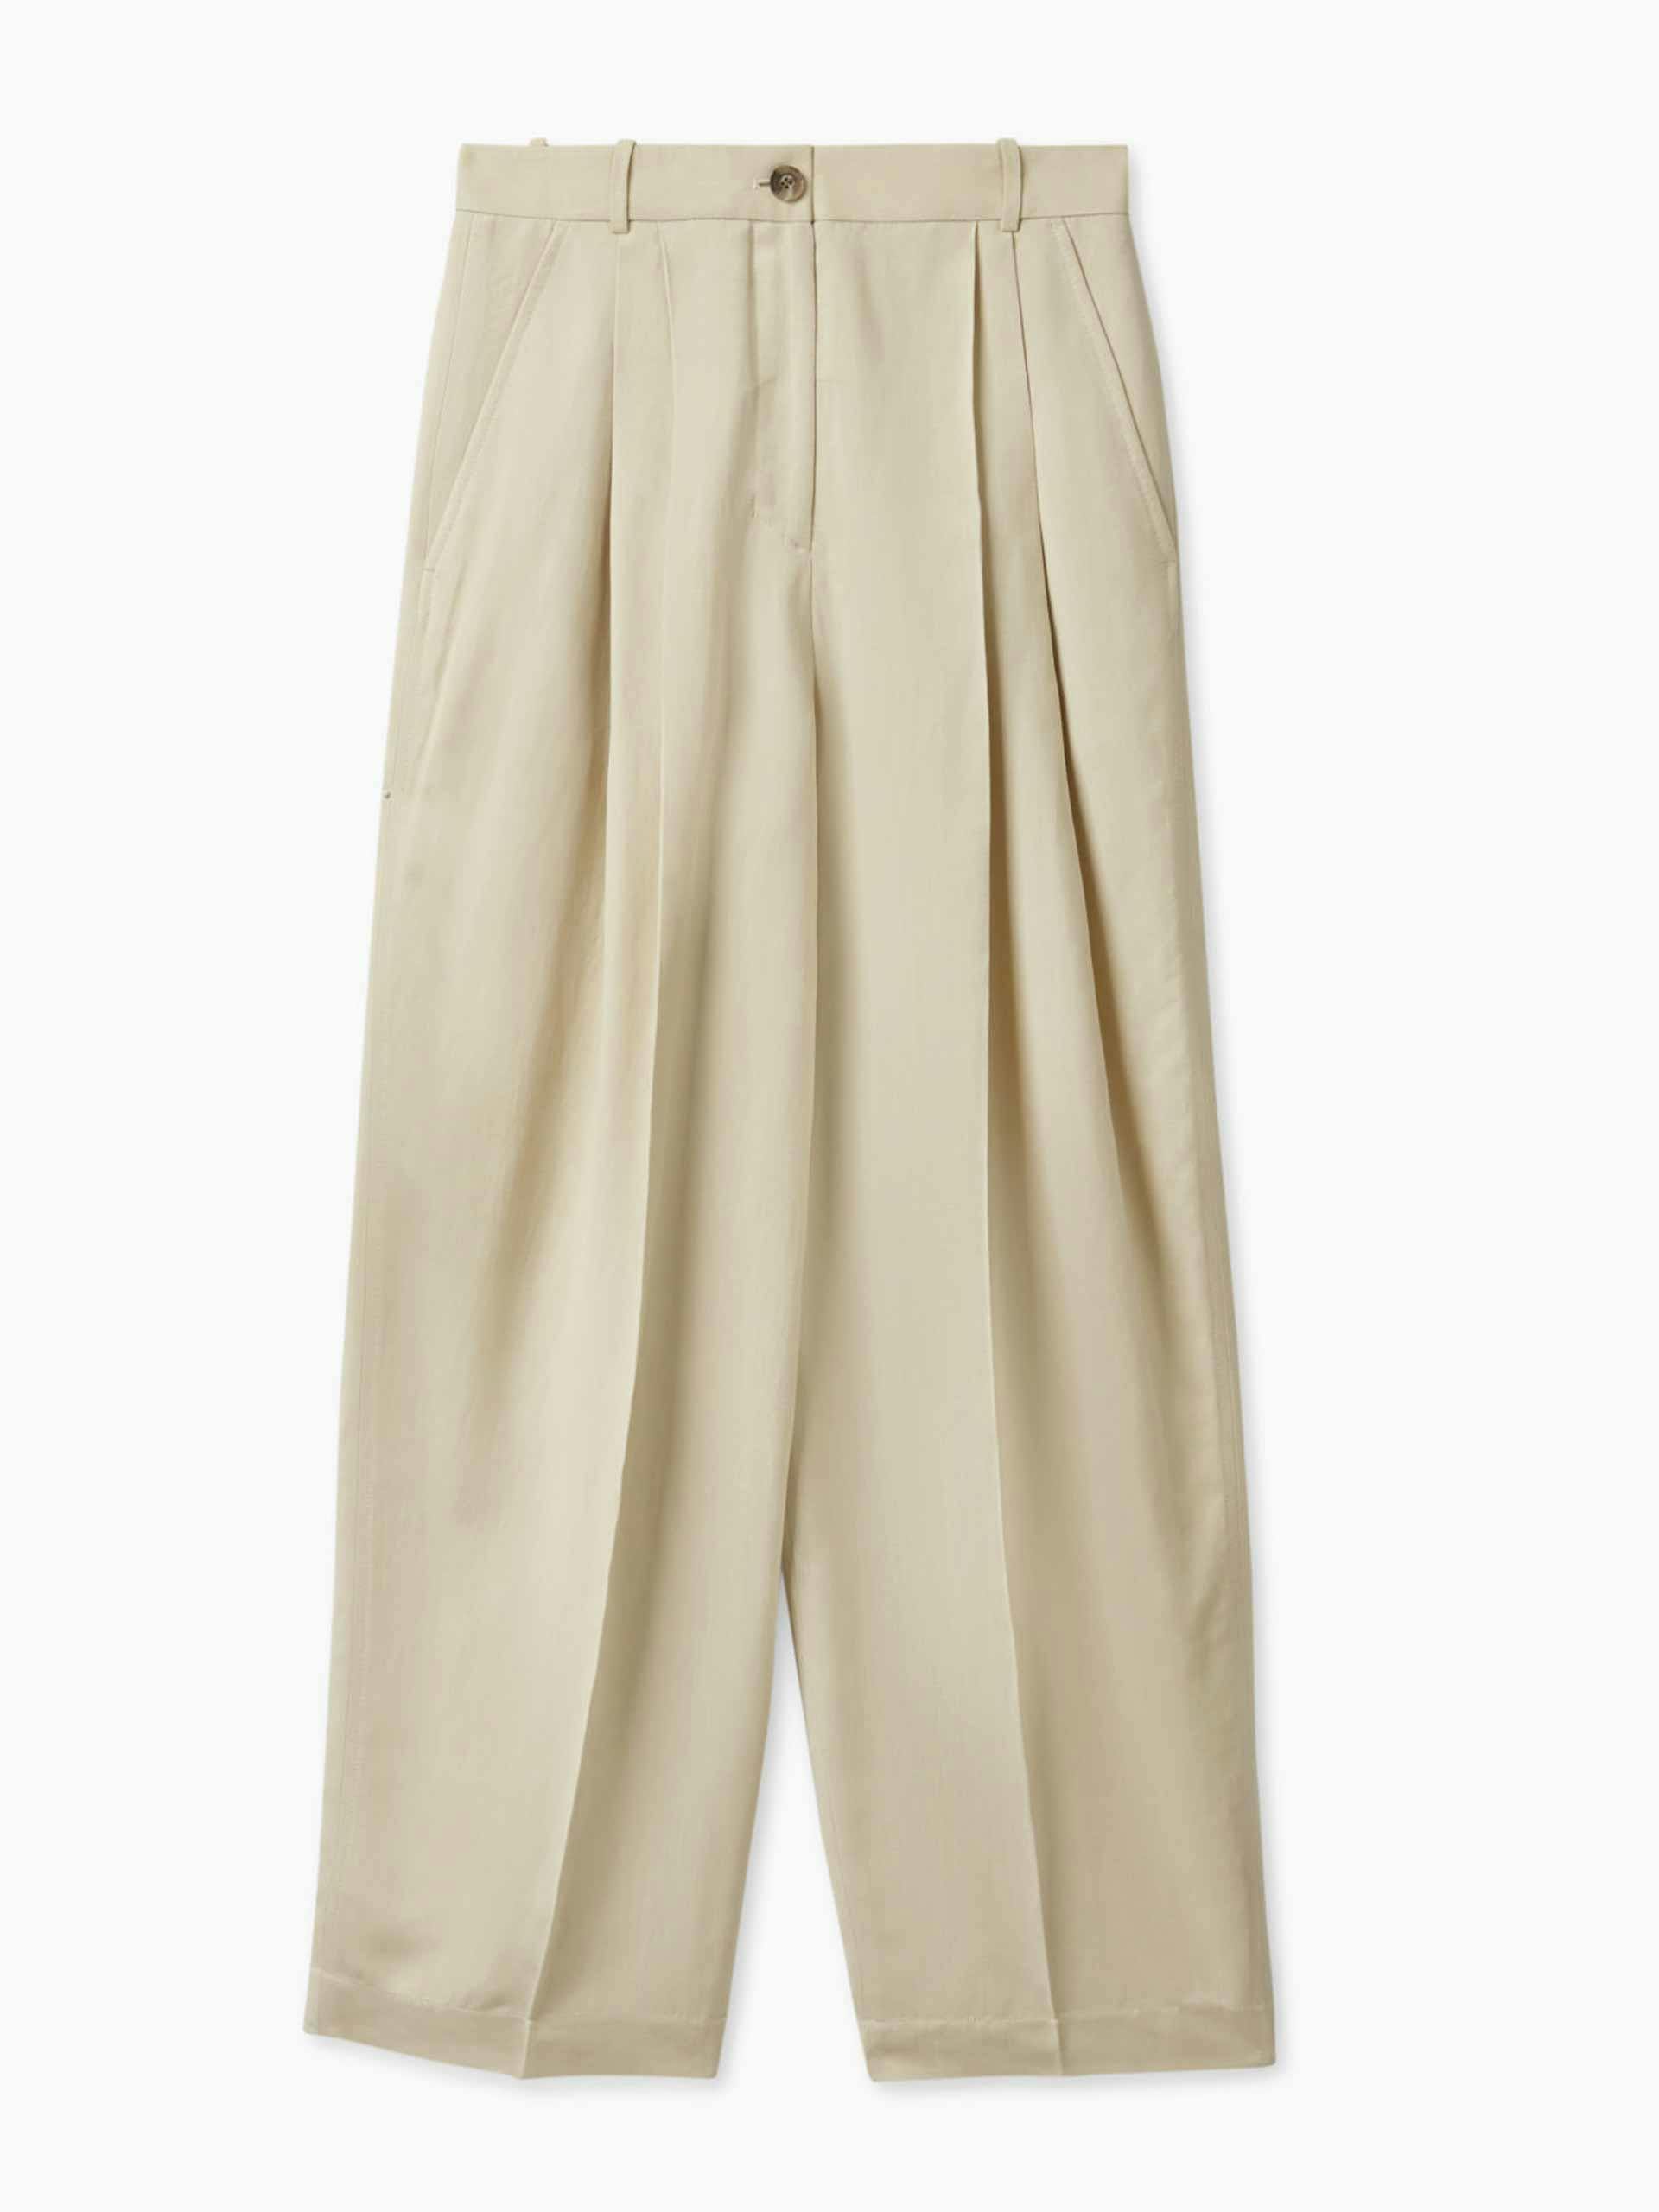 Relaxed fit tailored trousers